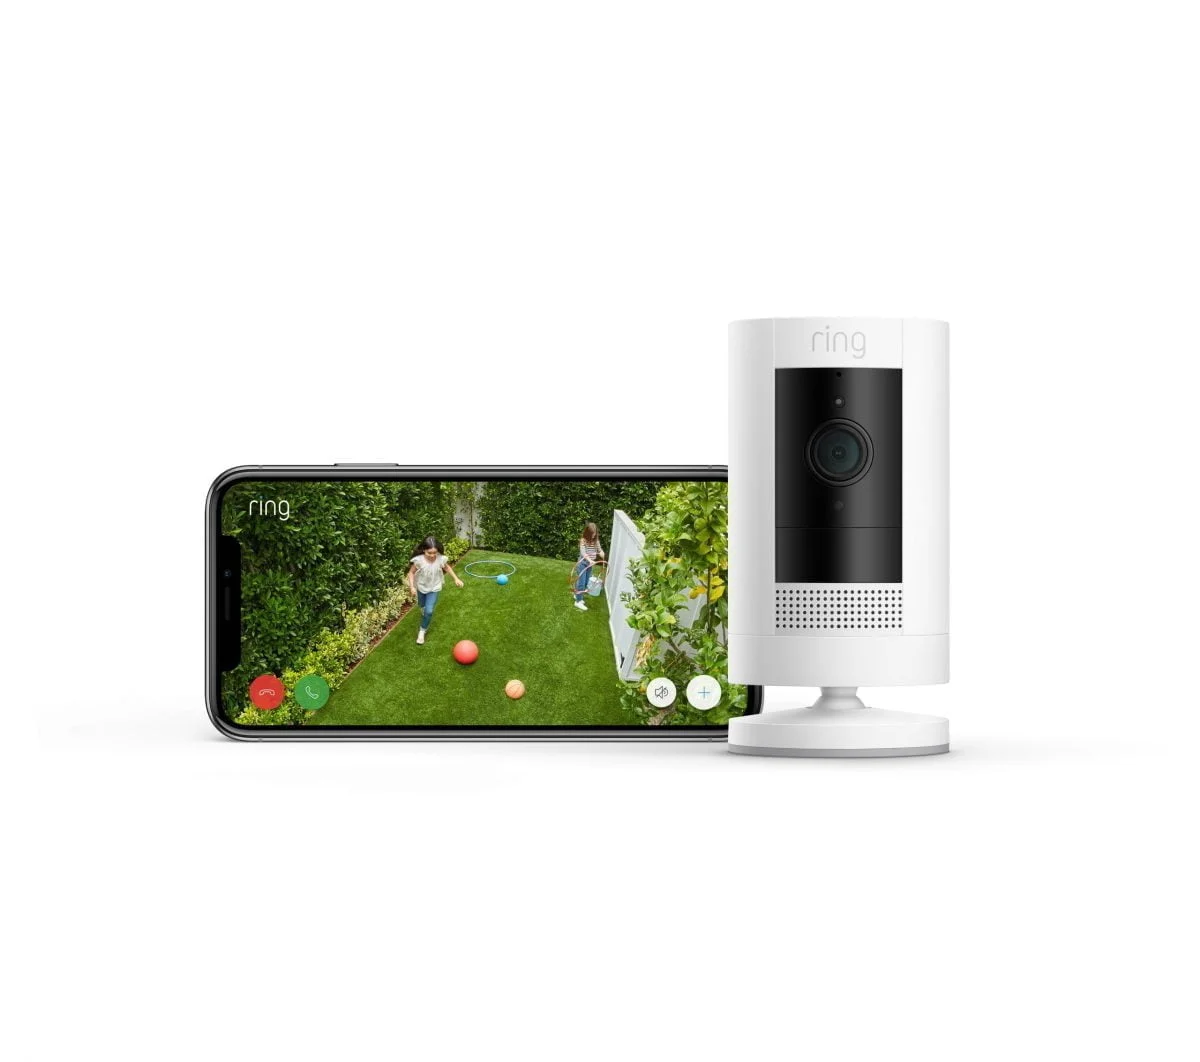 Lockup Cam Cocoa Battery Fv Cs Iphone X Kids Eu Scaled Ring Https://Youtu.be/Sdouokk6Eyk Add Security Inside Or Out With A Versatile Camera That Goes Almost Anywhere. Ring Stick Up Cam Battery Is An Indoor/Outdoor Camera That Sends Notifications To Your Phone And Tablet Whenever Motion Is Detected. Answer The Notification, And You Can See, Hear, And Speak To People On Camera From Anywhere. Place It On A Flat Surface So You Can Move It When You Need To. Or Mount It To A Wall For More Permanent Placement. With Ring Stick Up Cam Battery, You’ll Always Be Connected To Home So You Can See What’s Happening At Any Time. One Year Manufacturer Warranty Ring Ring Indoor/Outdoor 1080Hd Security Battery Cam With Two Way Talk